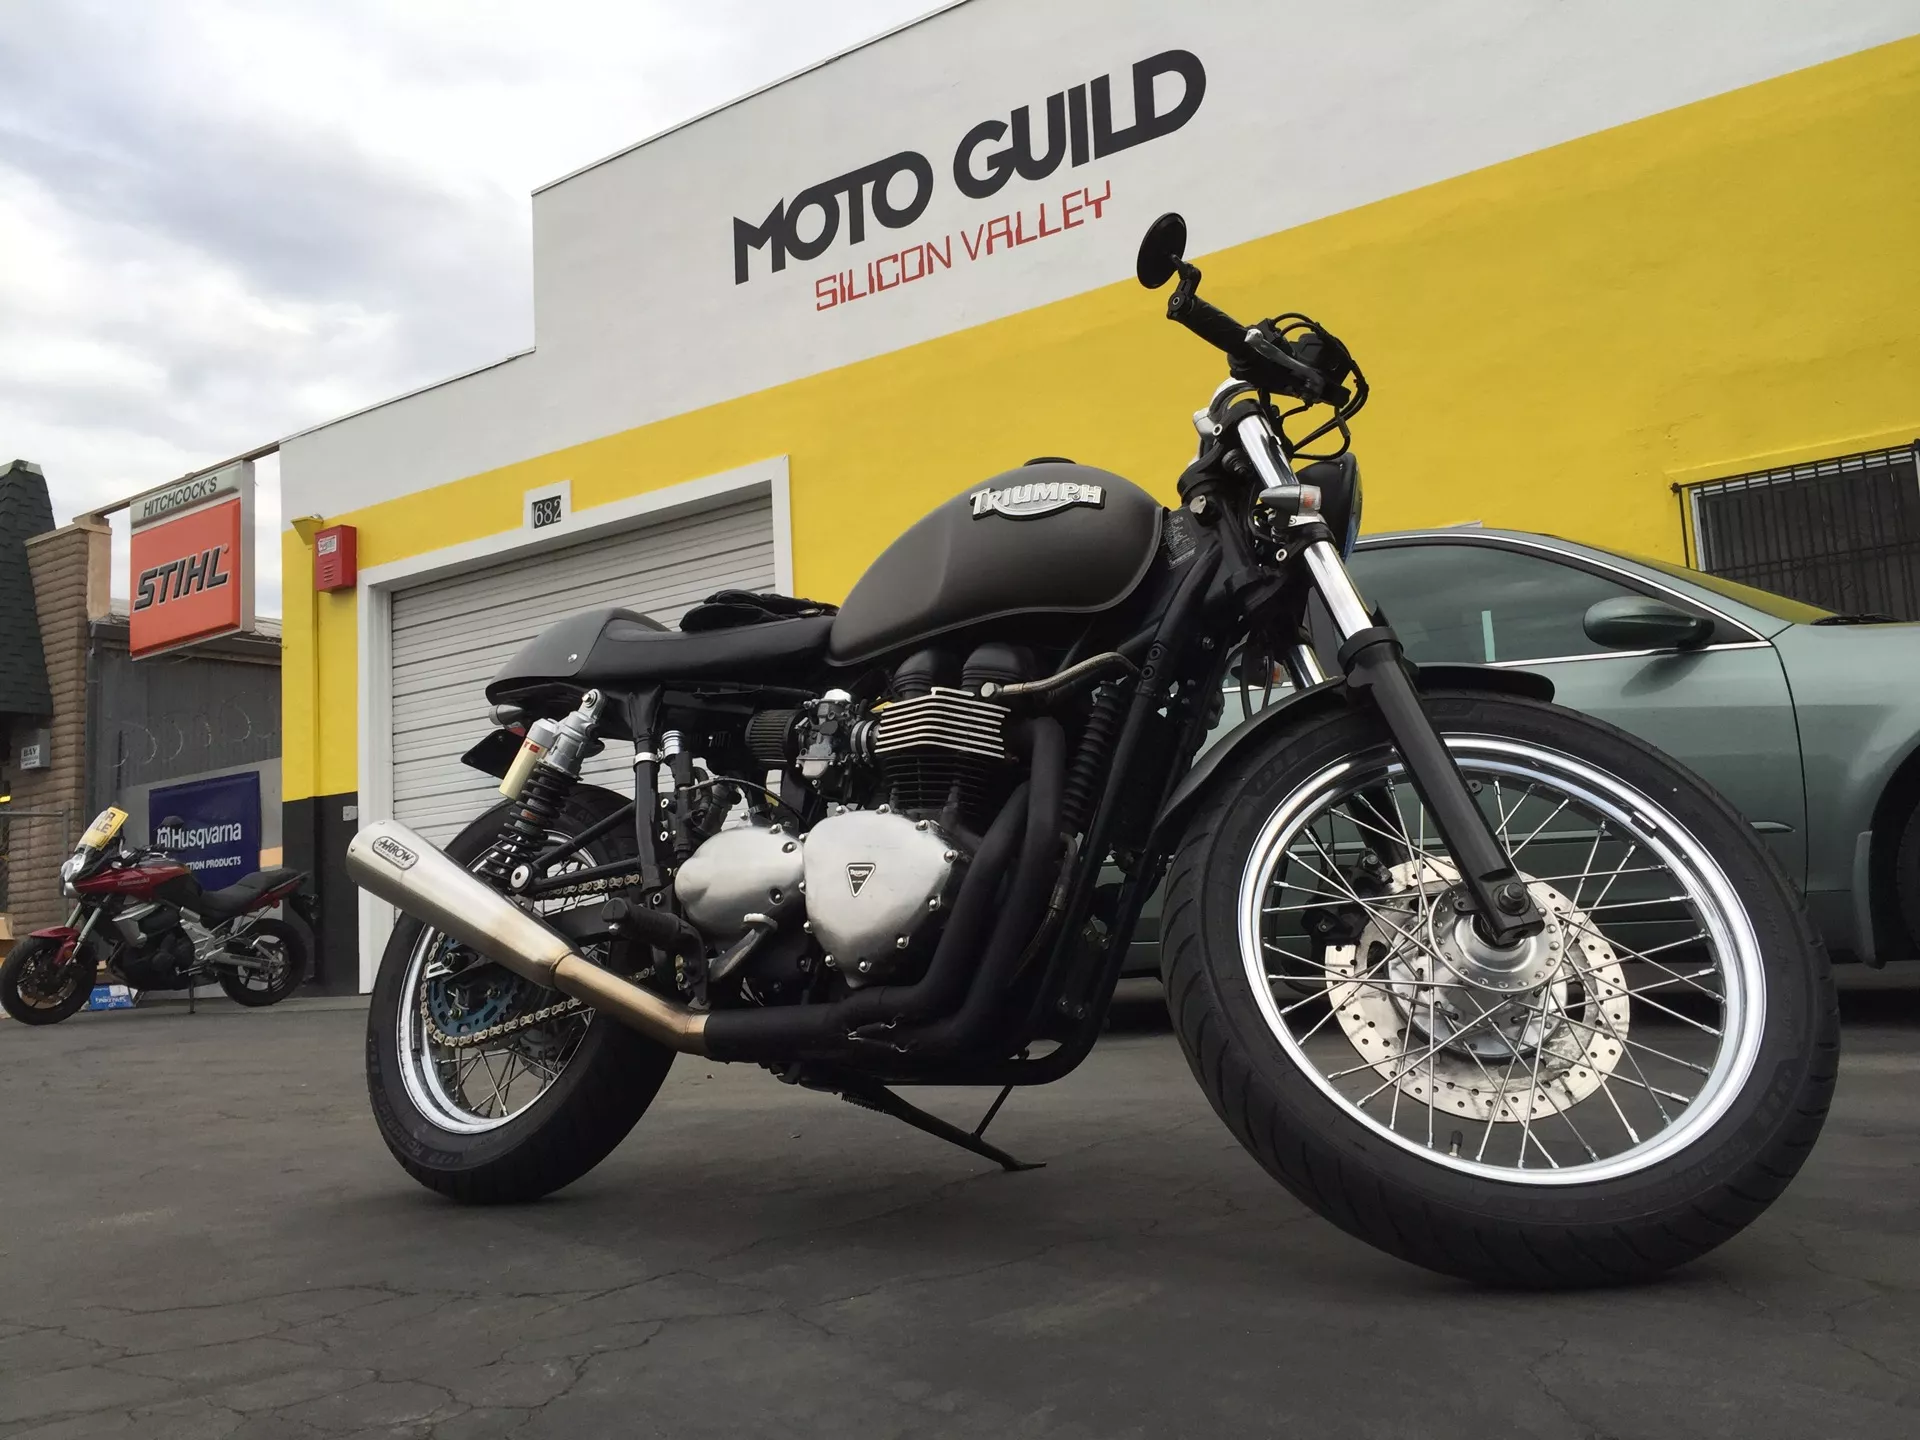 Moto Guild in USA, North America | Motorcycles - Rated 1